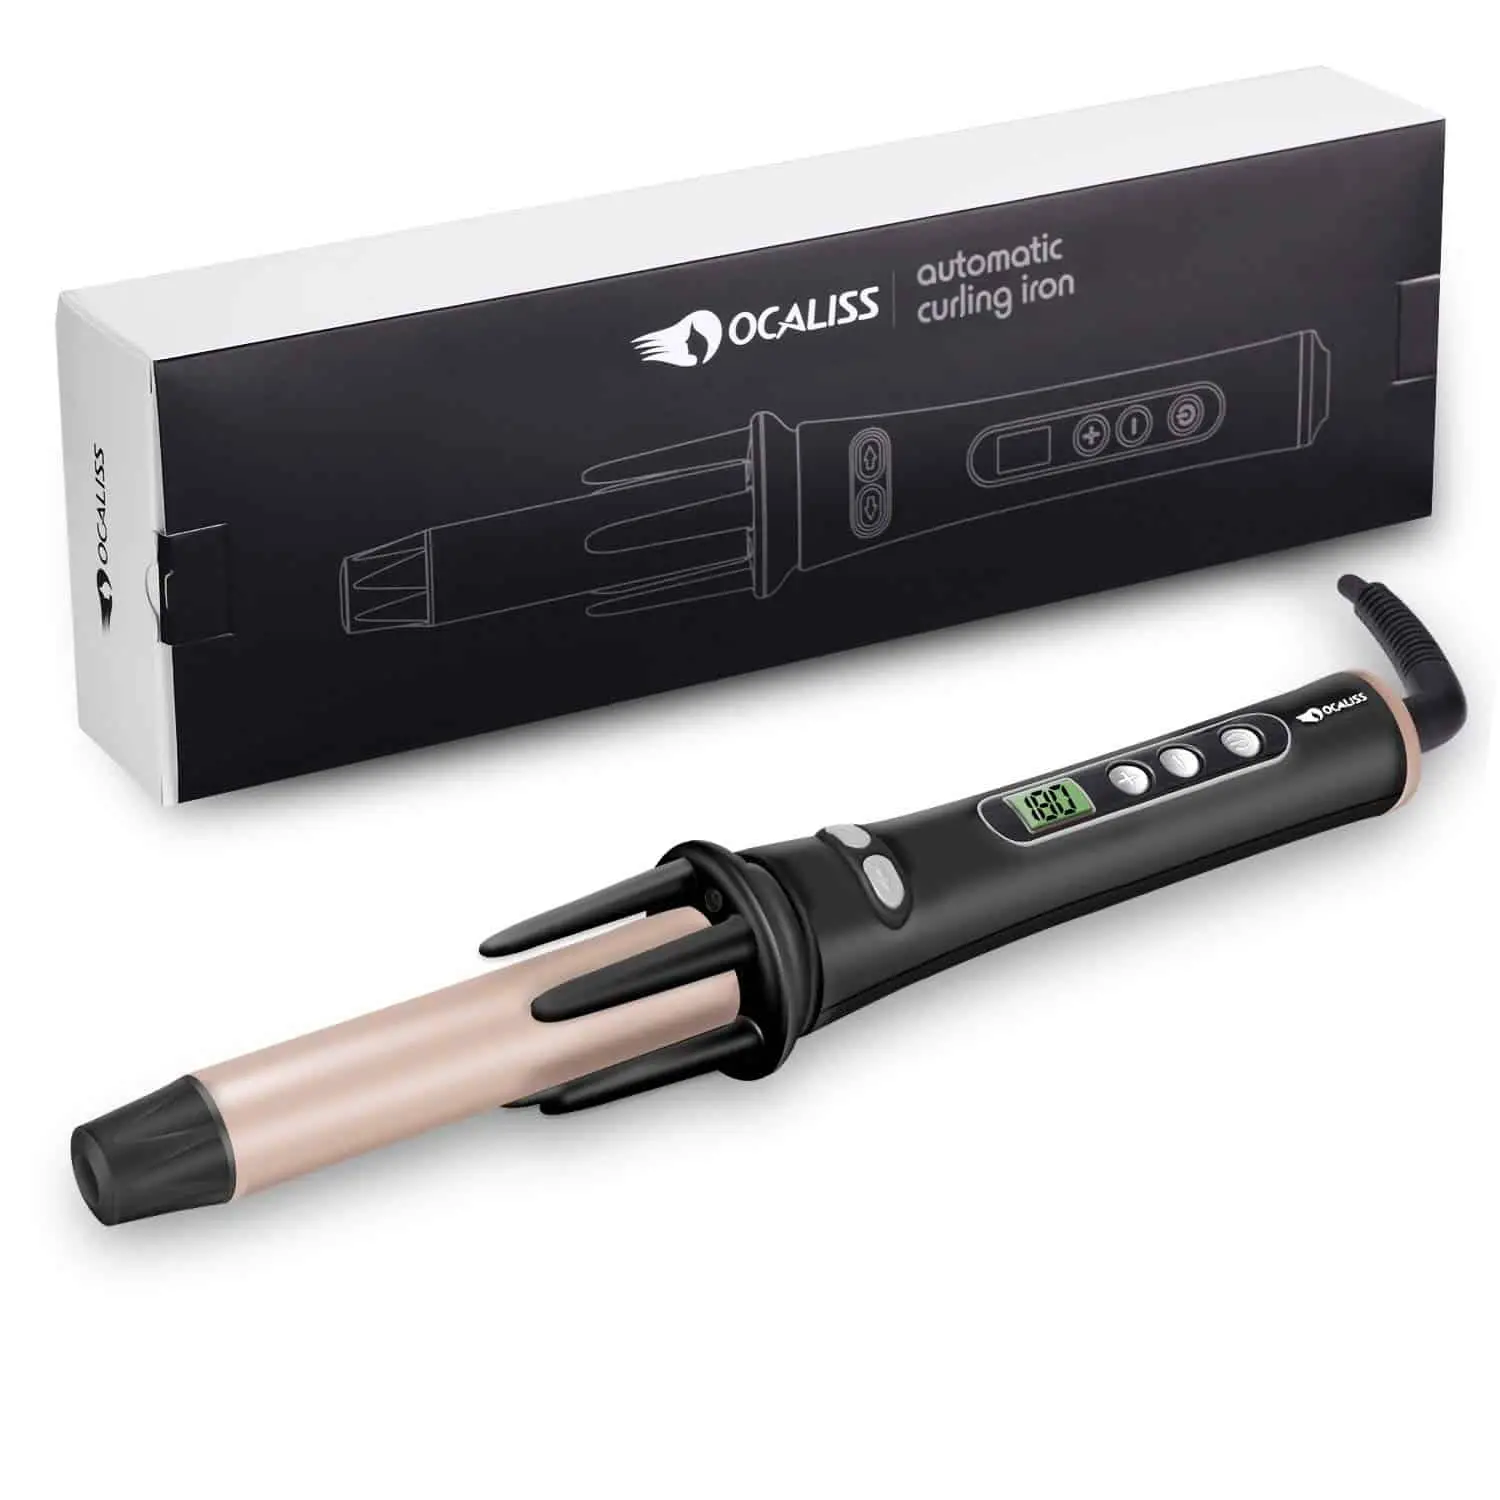 OCALISS Automatic Curling Iron